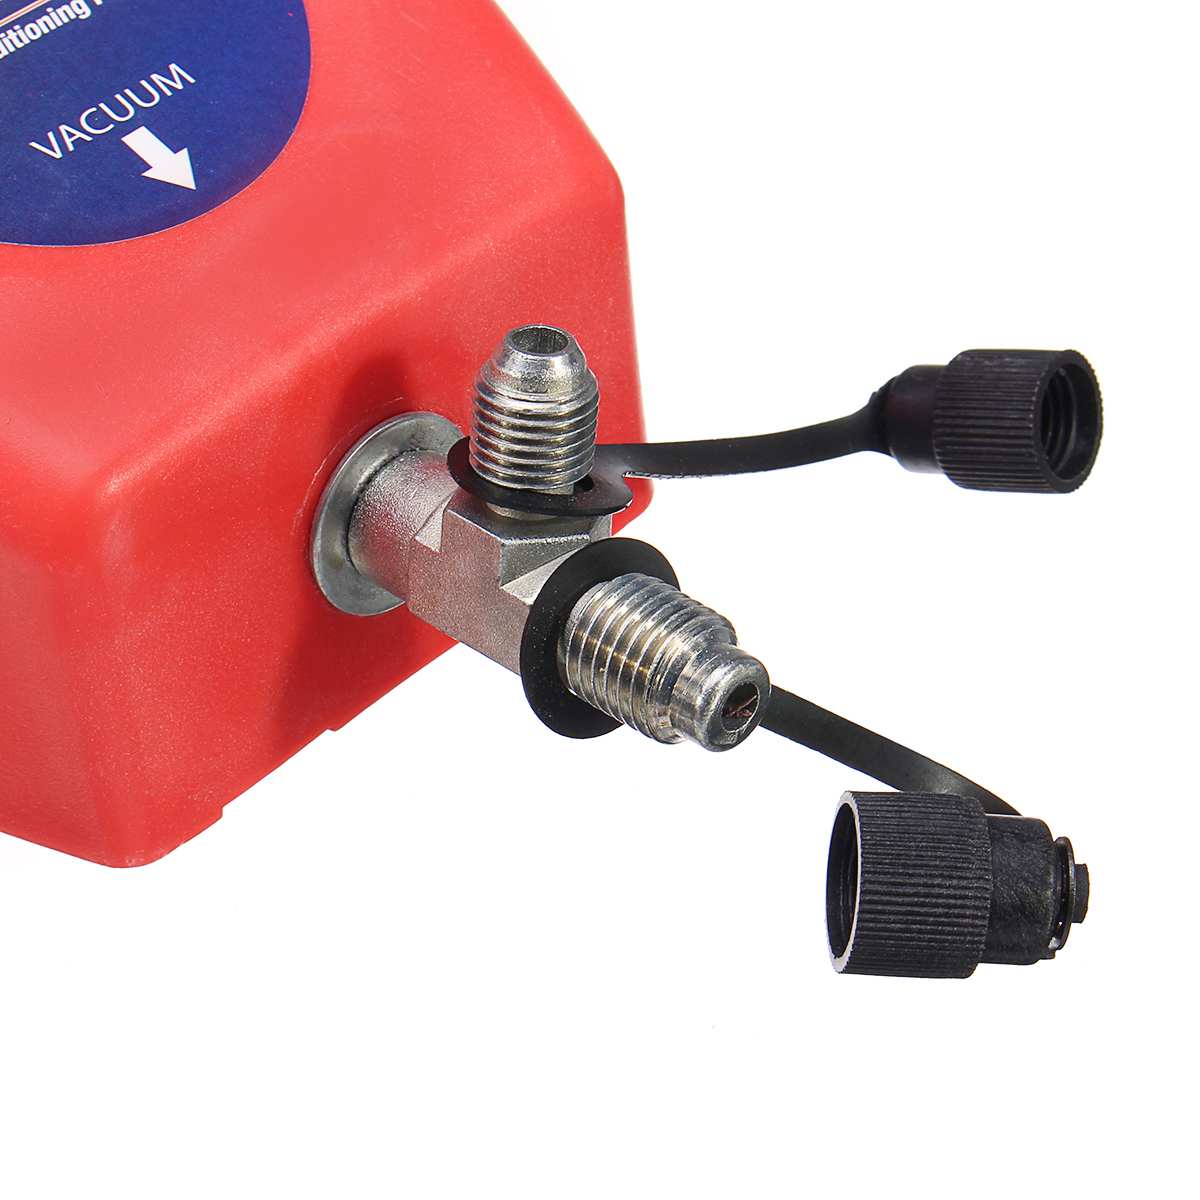 4.2CFM A/C Air Conditioning System Tool Air Operated Vacuum Pump Auto 1/2" ACME (R134a) & R12 Connector 80~150PSI Air Pressure